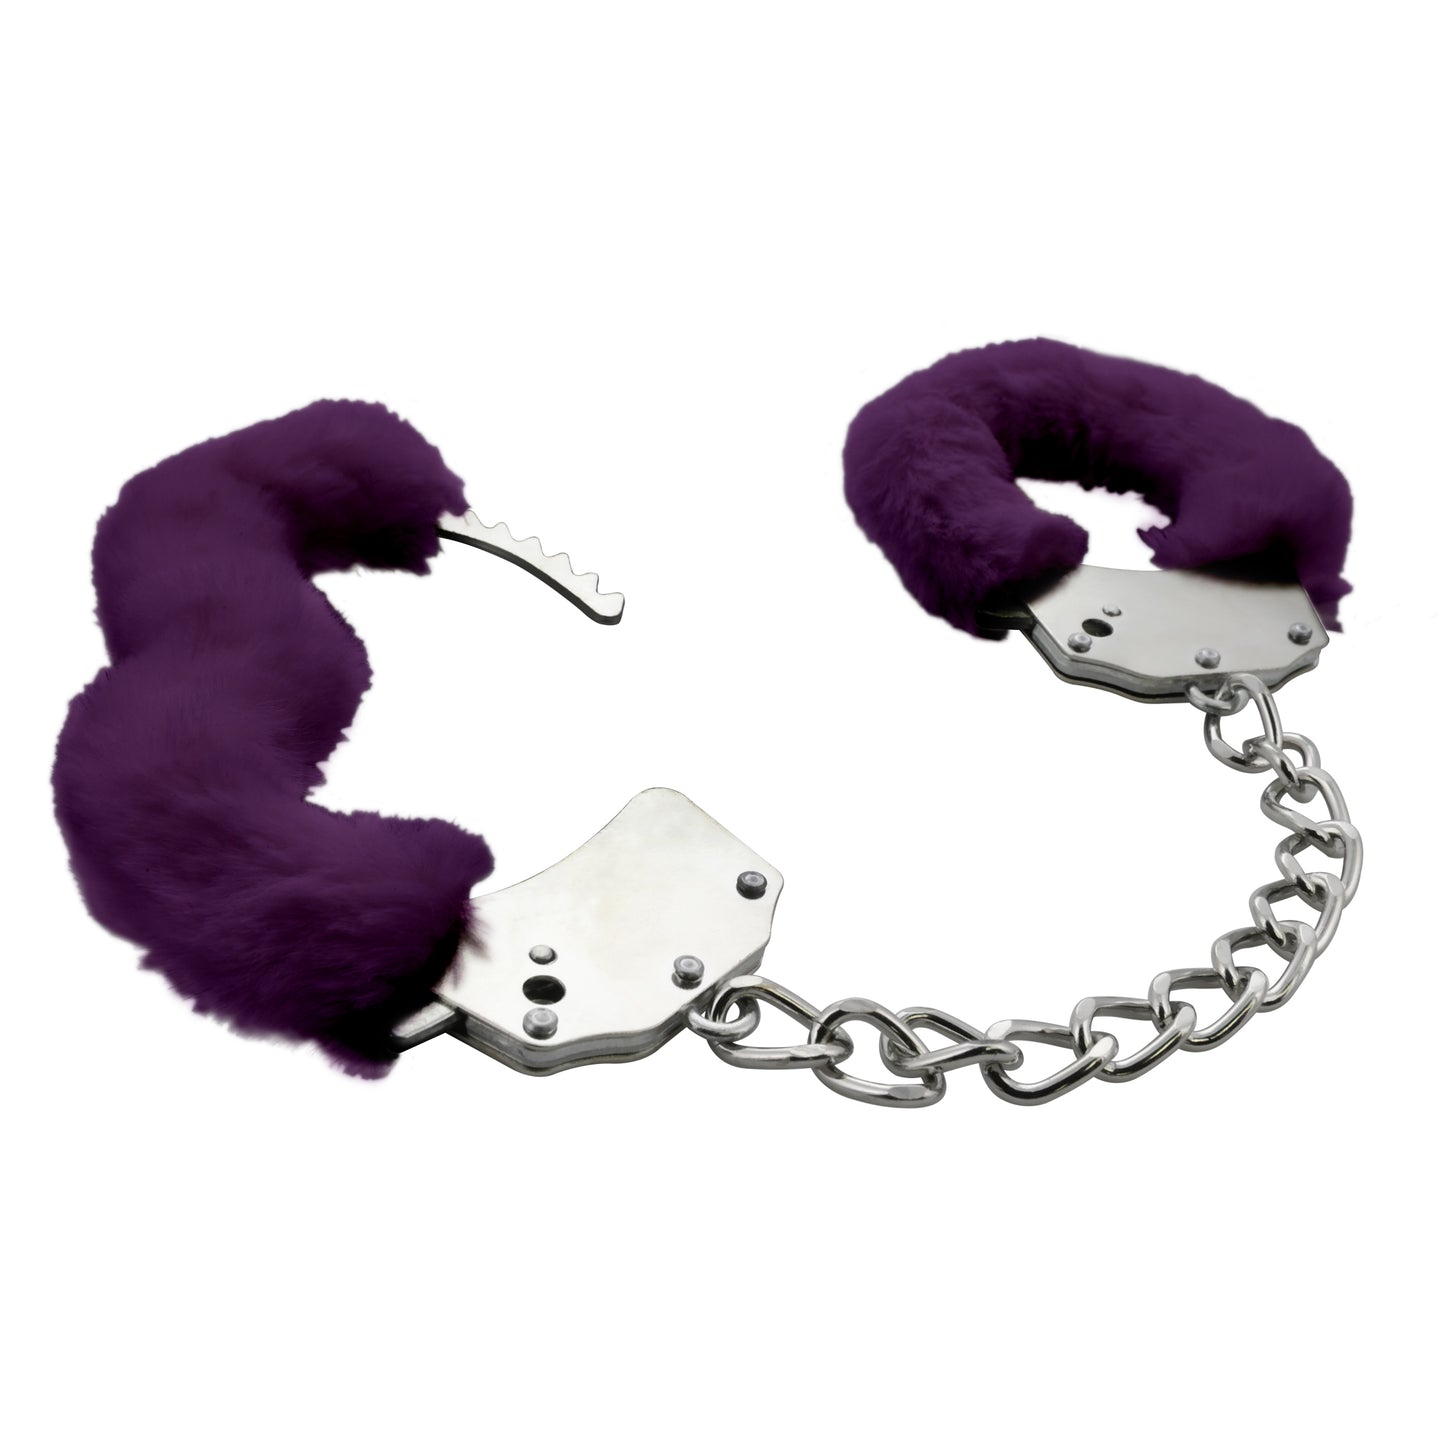 Soft and Furry Bondage Handcuffs - Consent and Comply Cuffs